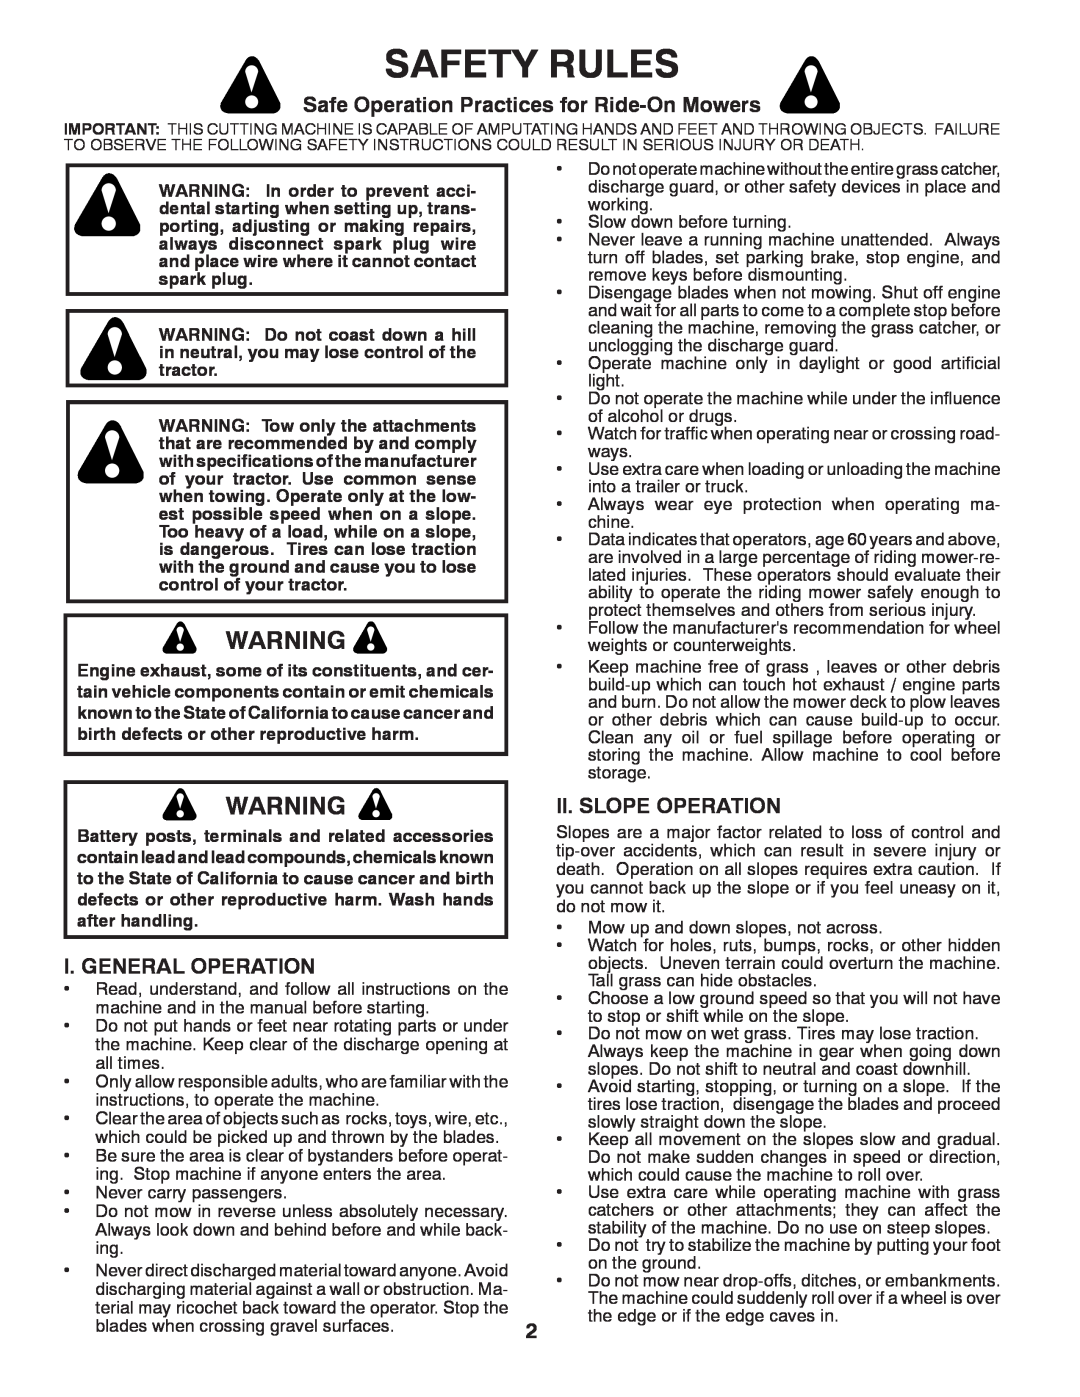 Poulan 96012006904 Safety Rules, Safe Operation Practices for Ride-On Mowers, I. General Operation, Ii. Slope Operation 